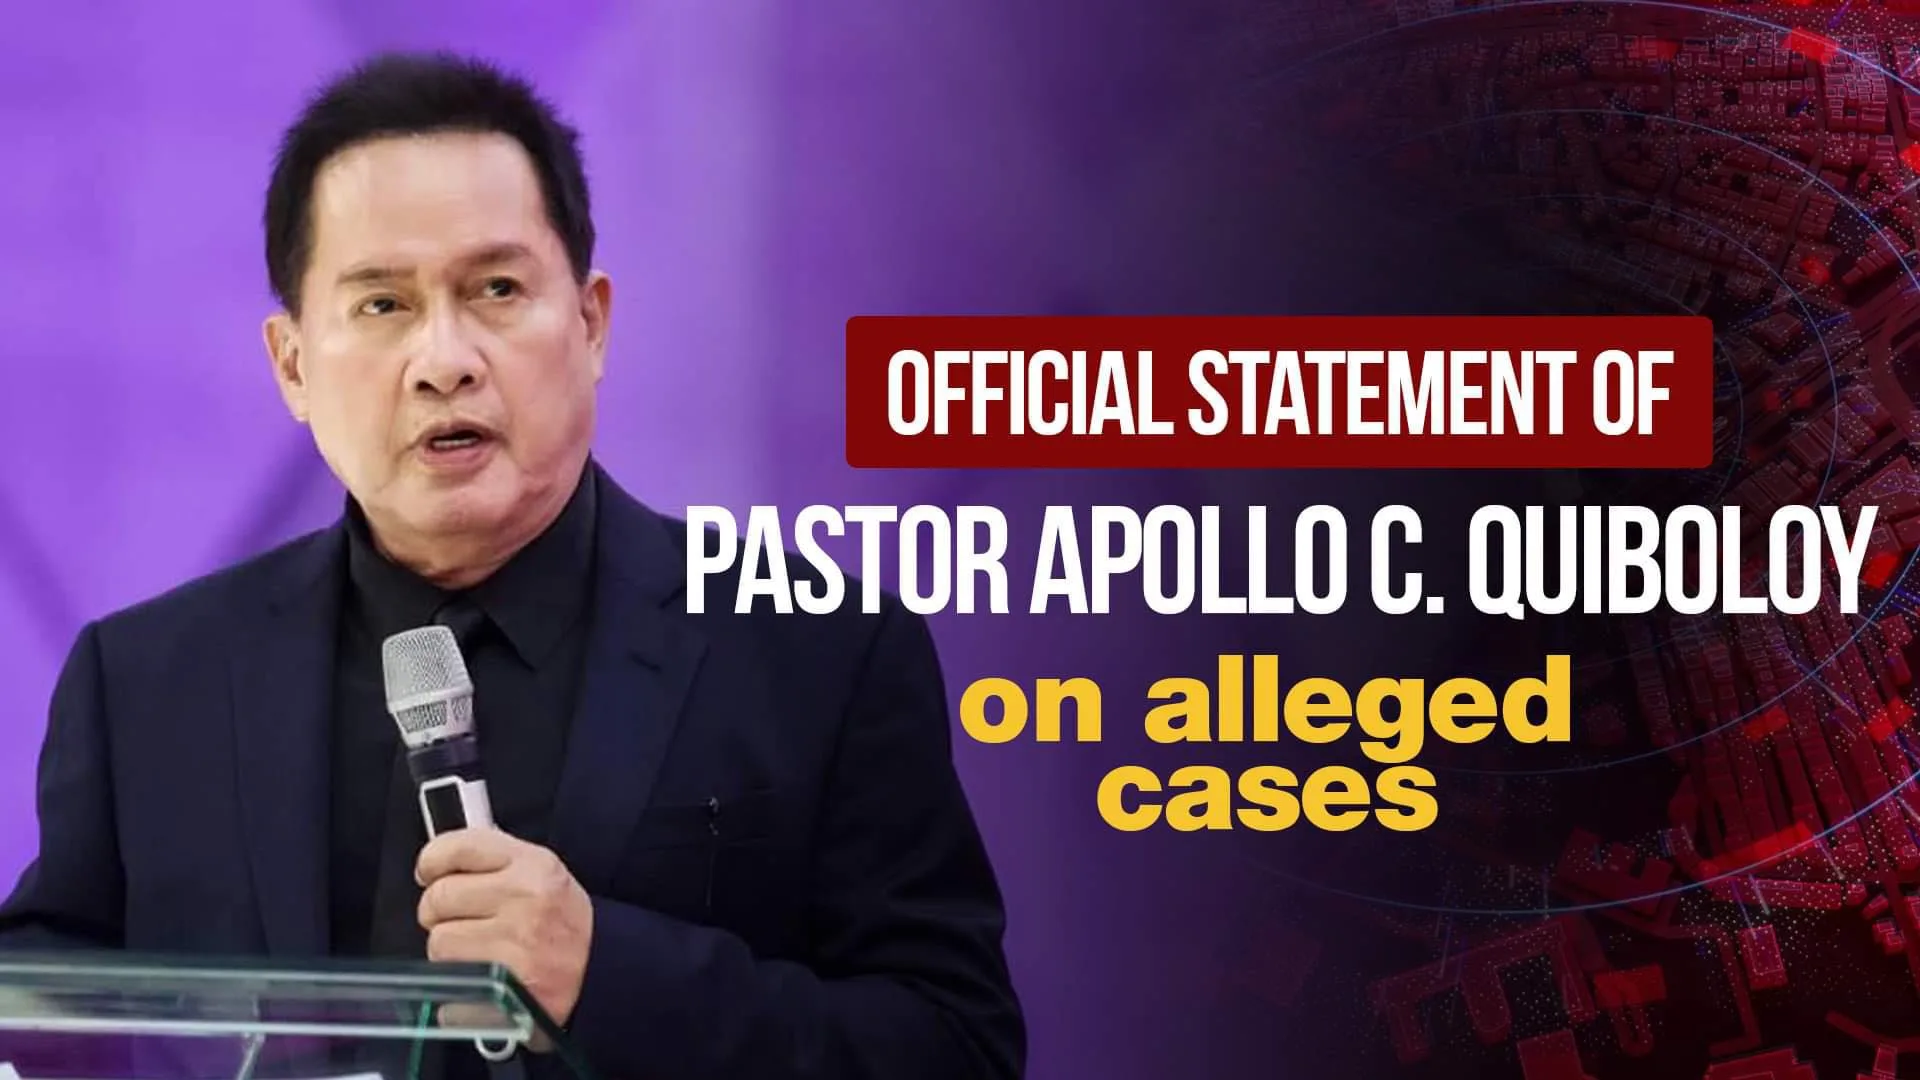 PASTOR APOLLO C. QUIBOLOY ISSUES STATEMENTS ON ALLEGED CASES jpg